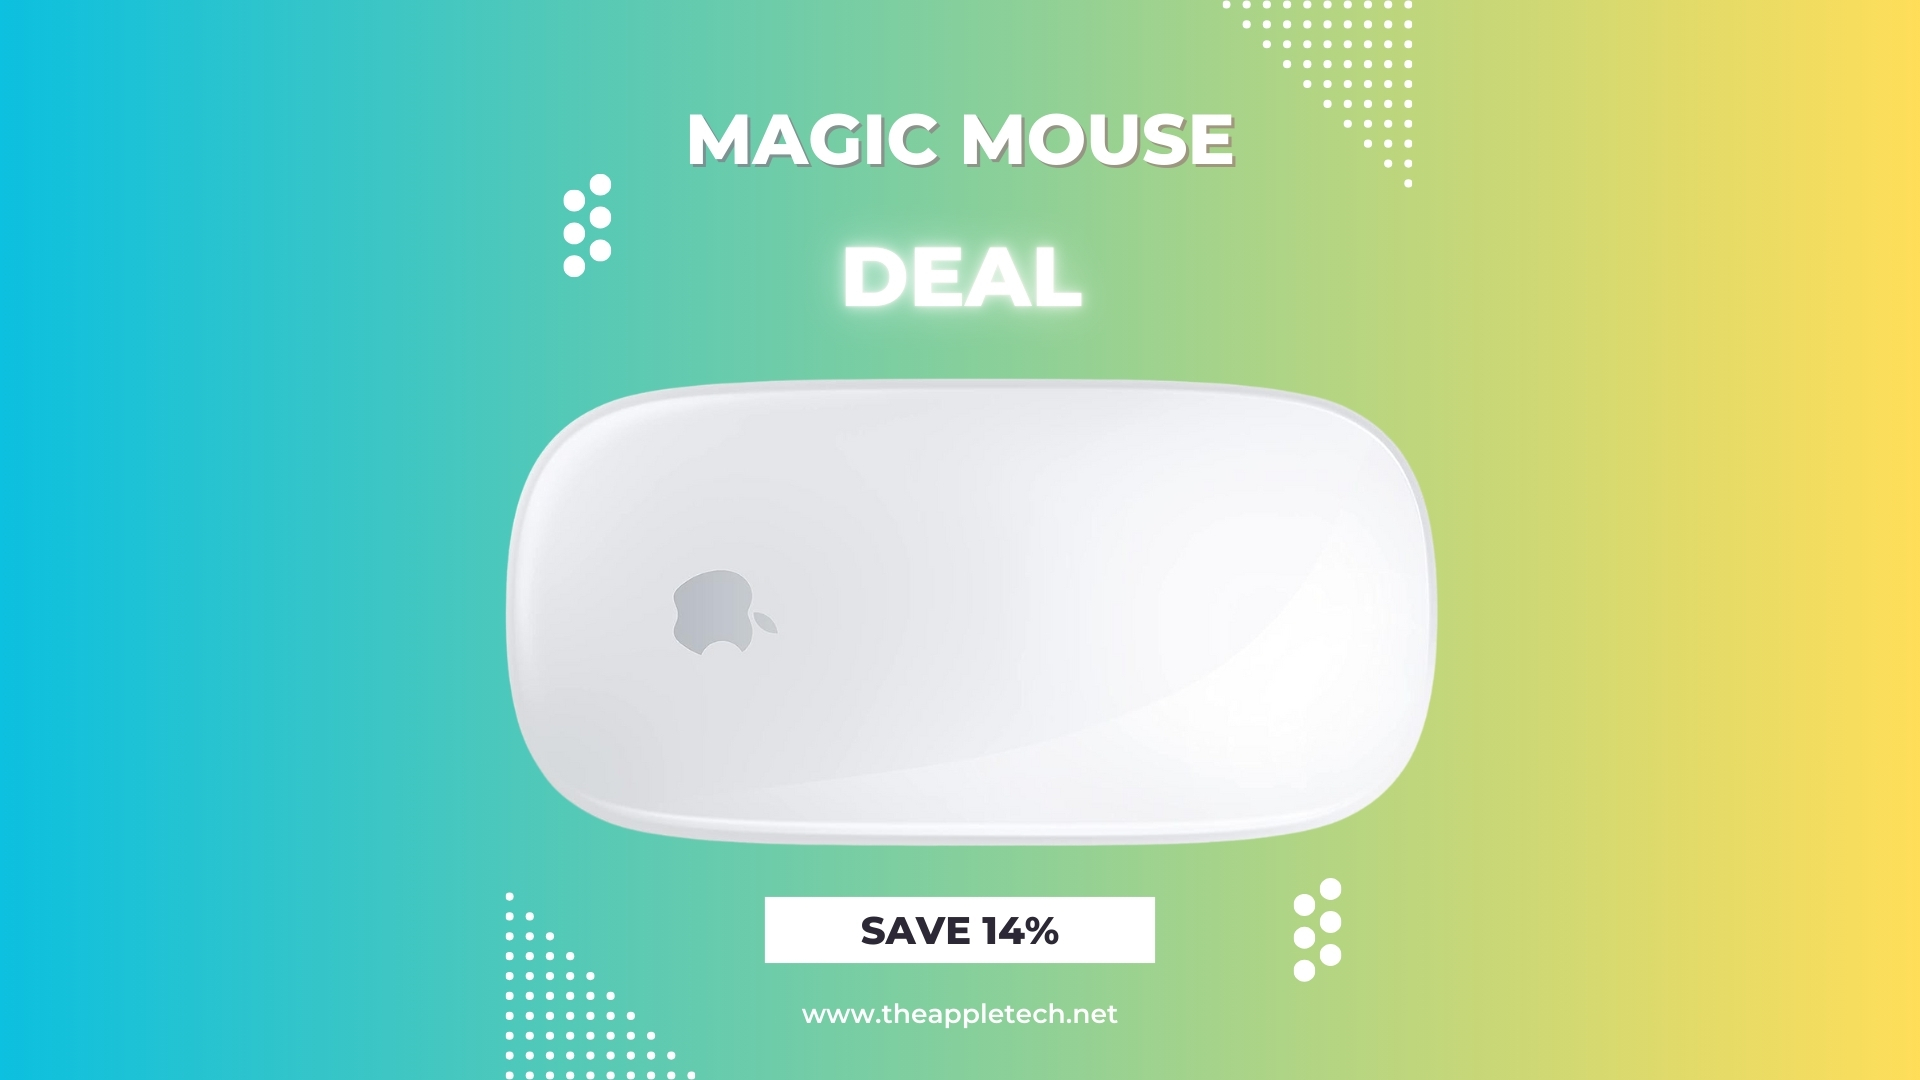 magic mouse deal offer